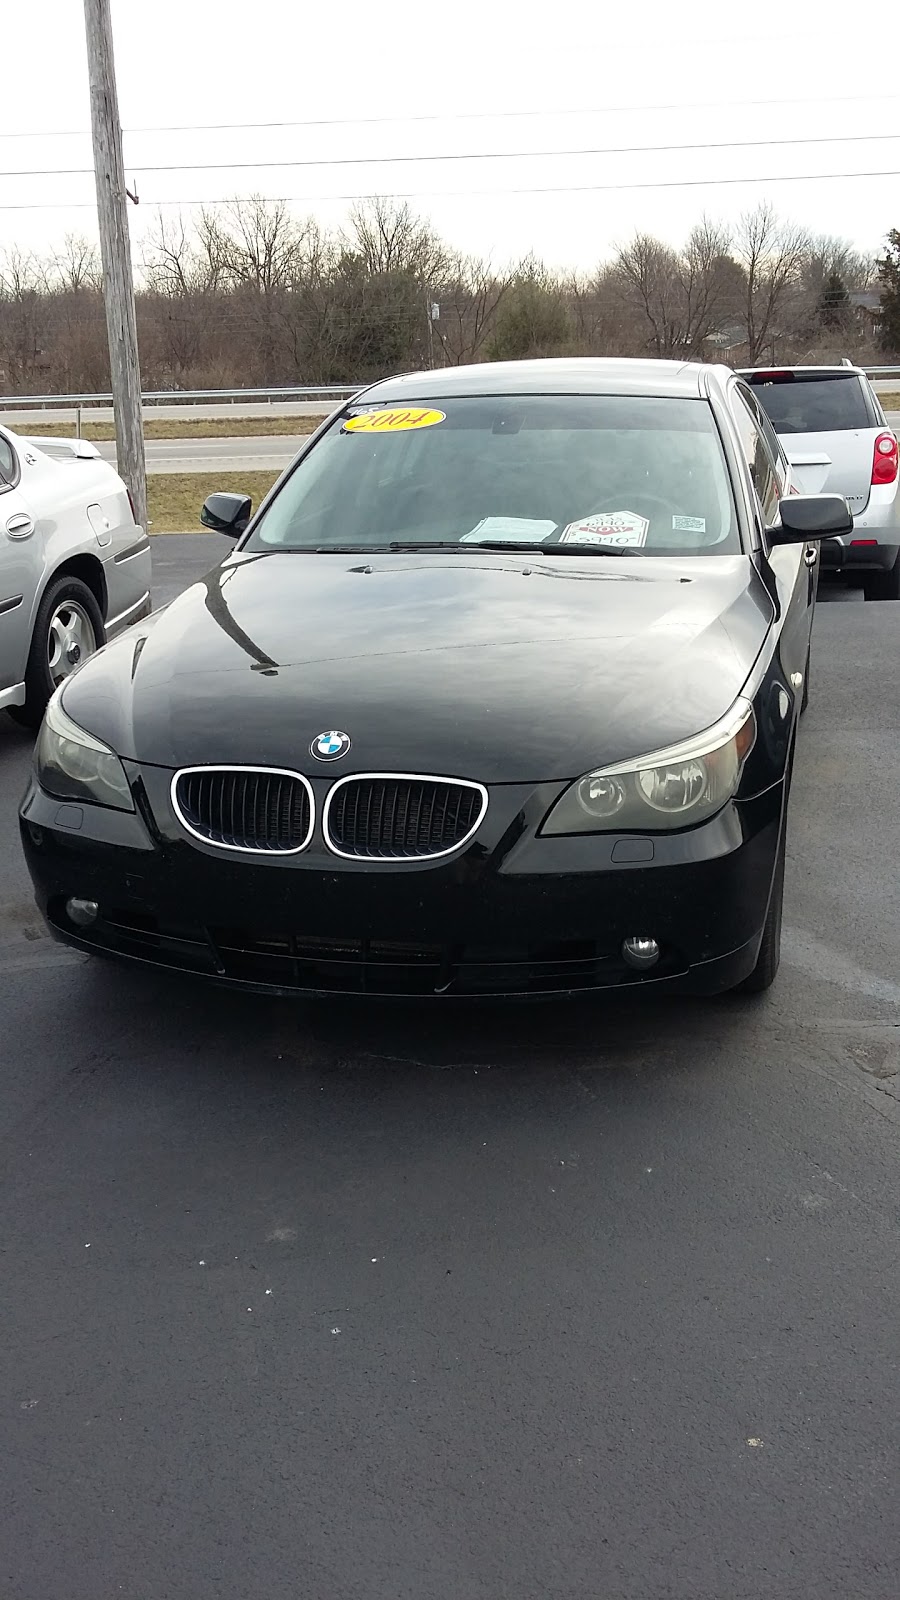 Import Cars R Us | 1030 Bypass S, Lawrenceburg, KY 40342, USA | Phone: (502) 859-3004